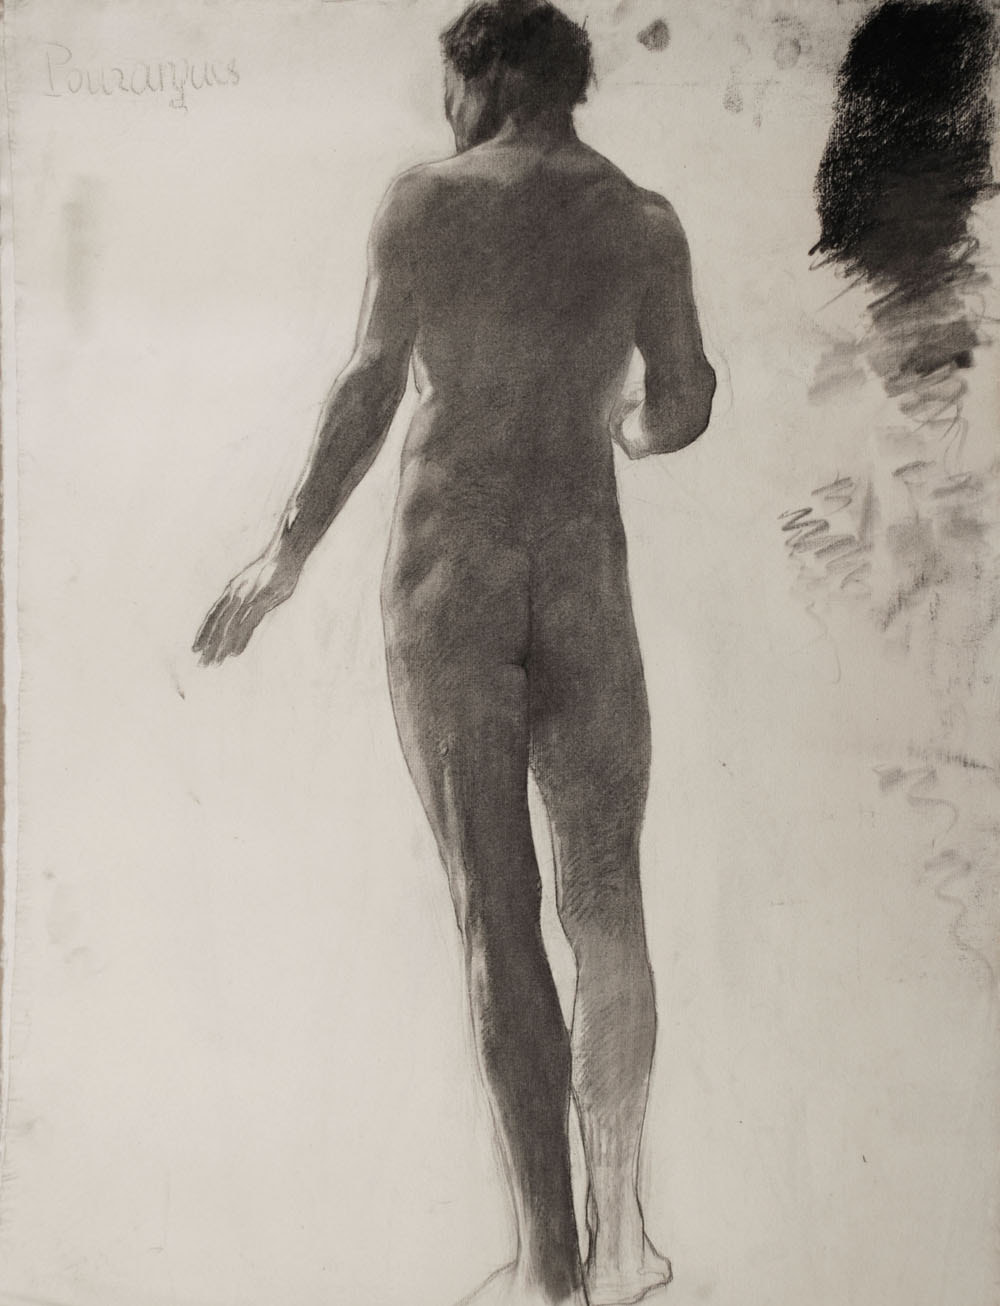 Lucien-Paul Pouzargues drawing nude from behind